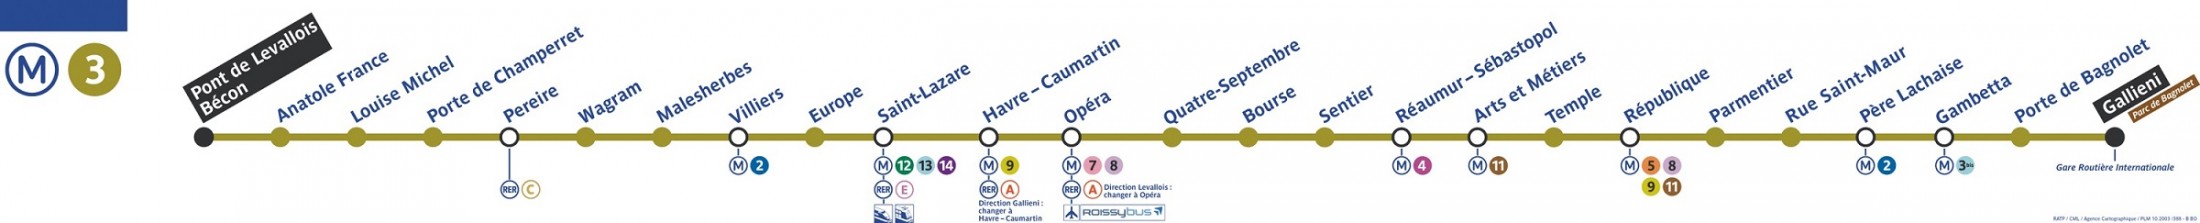 LOCATION & CONTACT - Map & Transportations Levallois-Perret Hotel ...